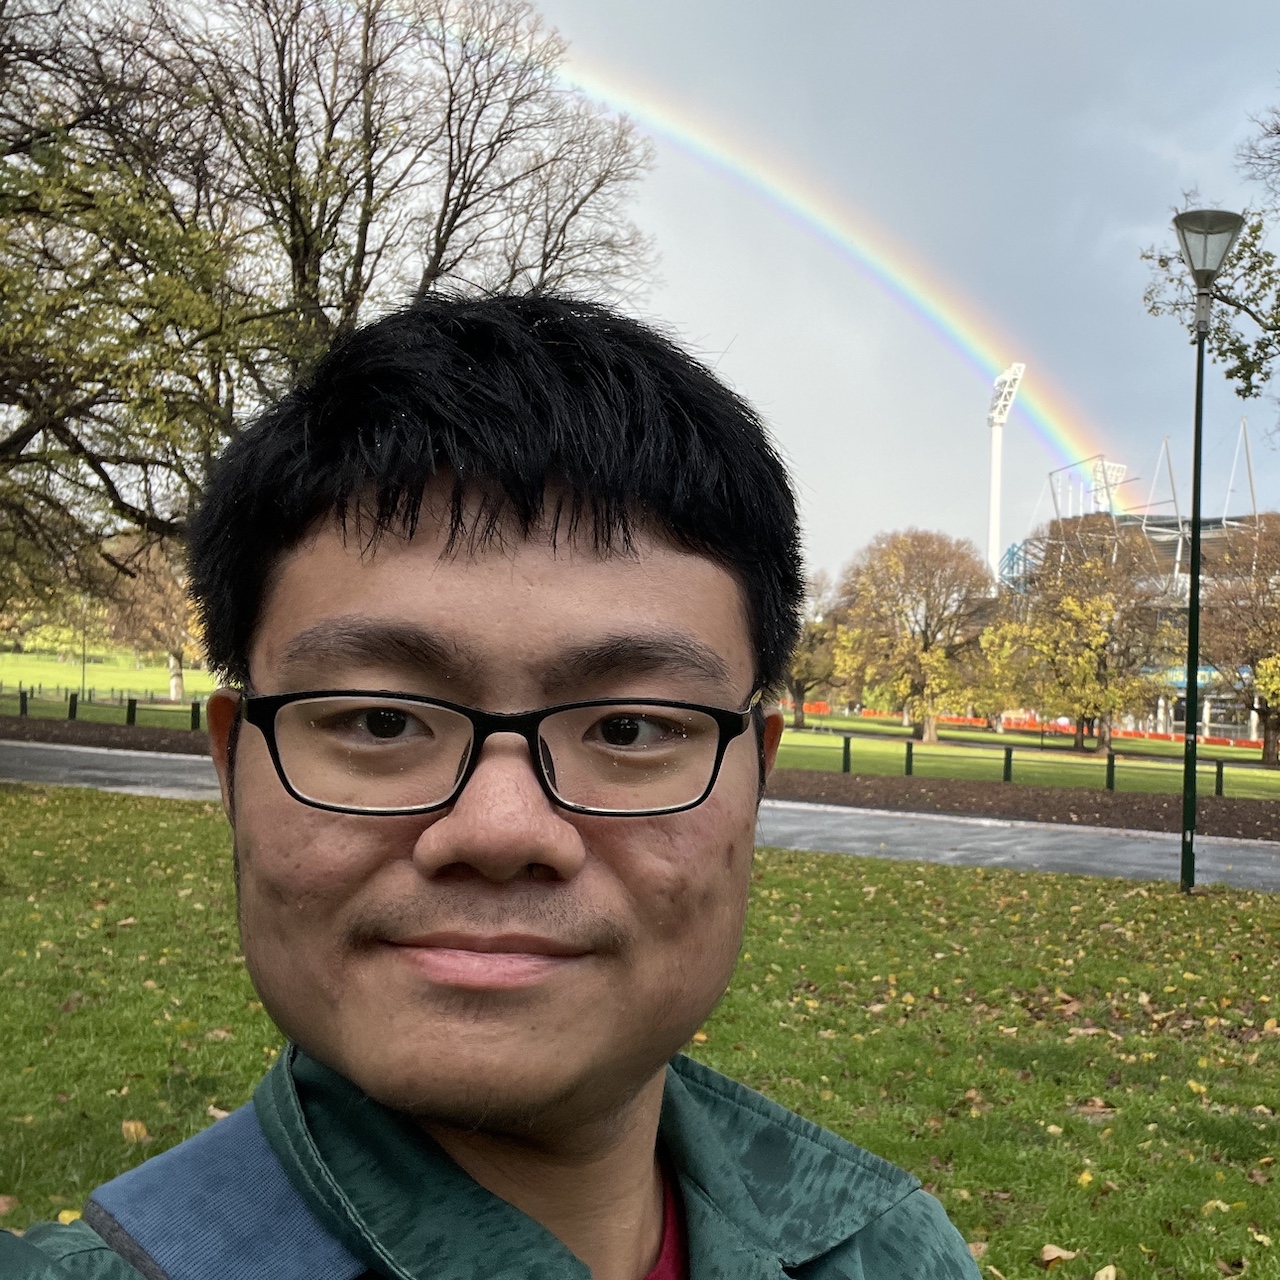 A selfie of me with a rainbow in a park.